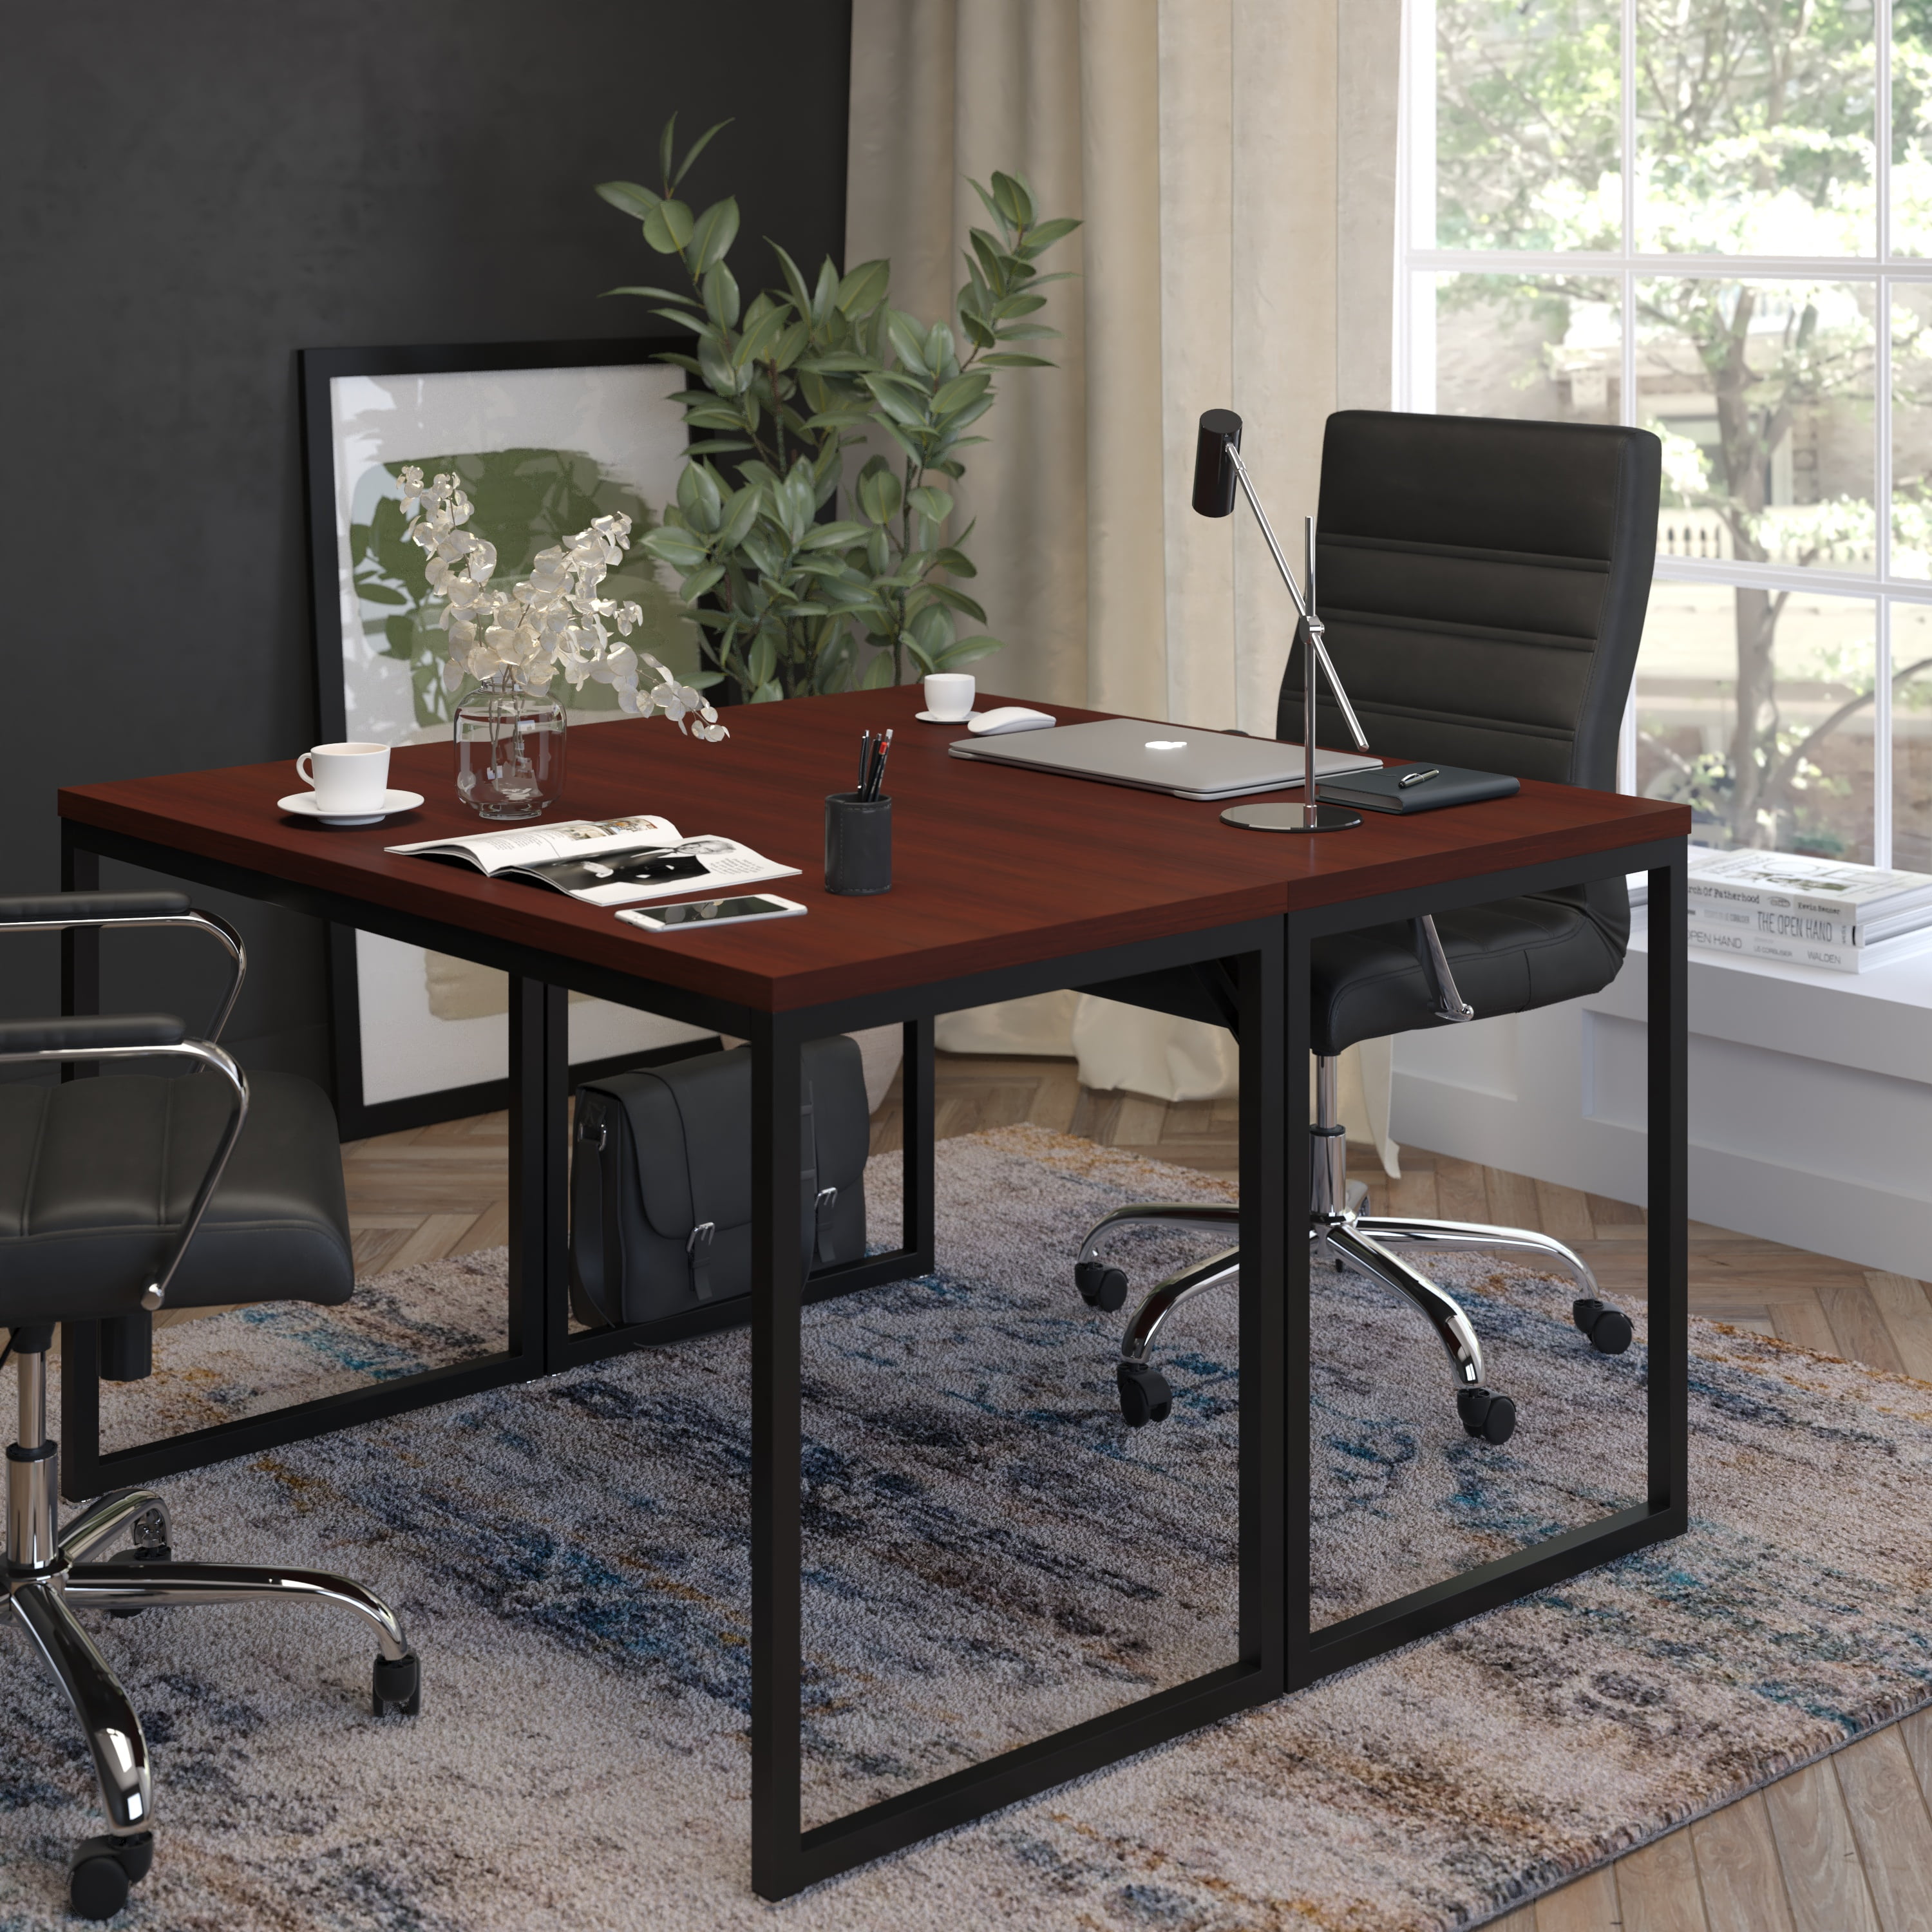 HomeInteriorFurniture is for sale at Squadhelp.com!  Contemporary office  desk, Industrial office furniture, Office furniture modern